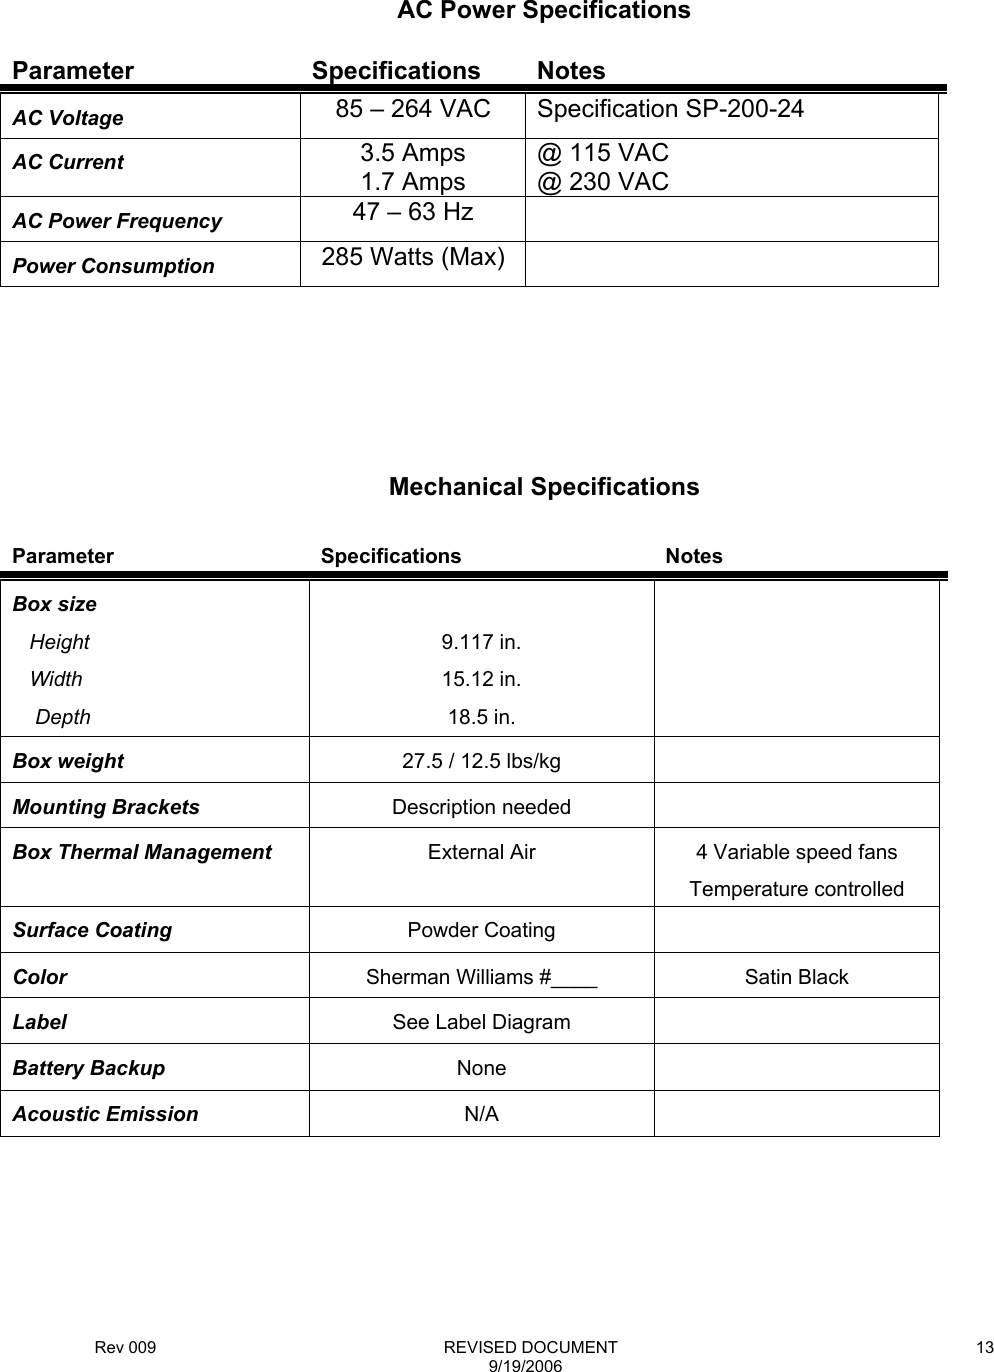 Rev 009                                                              REVISED DOCUMENT 9/19/2006 13     Parameter Specifications Notes AC Voltage  85 – 264 VAC  Specification SP-200-24 AC Current   3.5 Amps 1.7 Amps @ 115 VAC @ 230 VAC AC Power Frequency  47 – 63 Hz   Power Consumption  285 Watts (Max)         Parameter Specifications Notes Box size    Height    Width     Depth  9.117 in. 15.12 in. 18.5 in.  Box weight  27.5 / 12.5 lbs/kg   Mounting Brackets  Description needed   Box Thermal Management  External Air  4 Variable speed fans Temperature controlled Surface Coating  Powder Coating   Color  Sherman Williams #____  Satin Black Label  See Label Diagram   Battery Backup  None  Acoustic Emission  N/A       AC Power Specifications Mechanical Specifications 